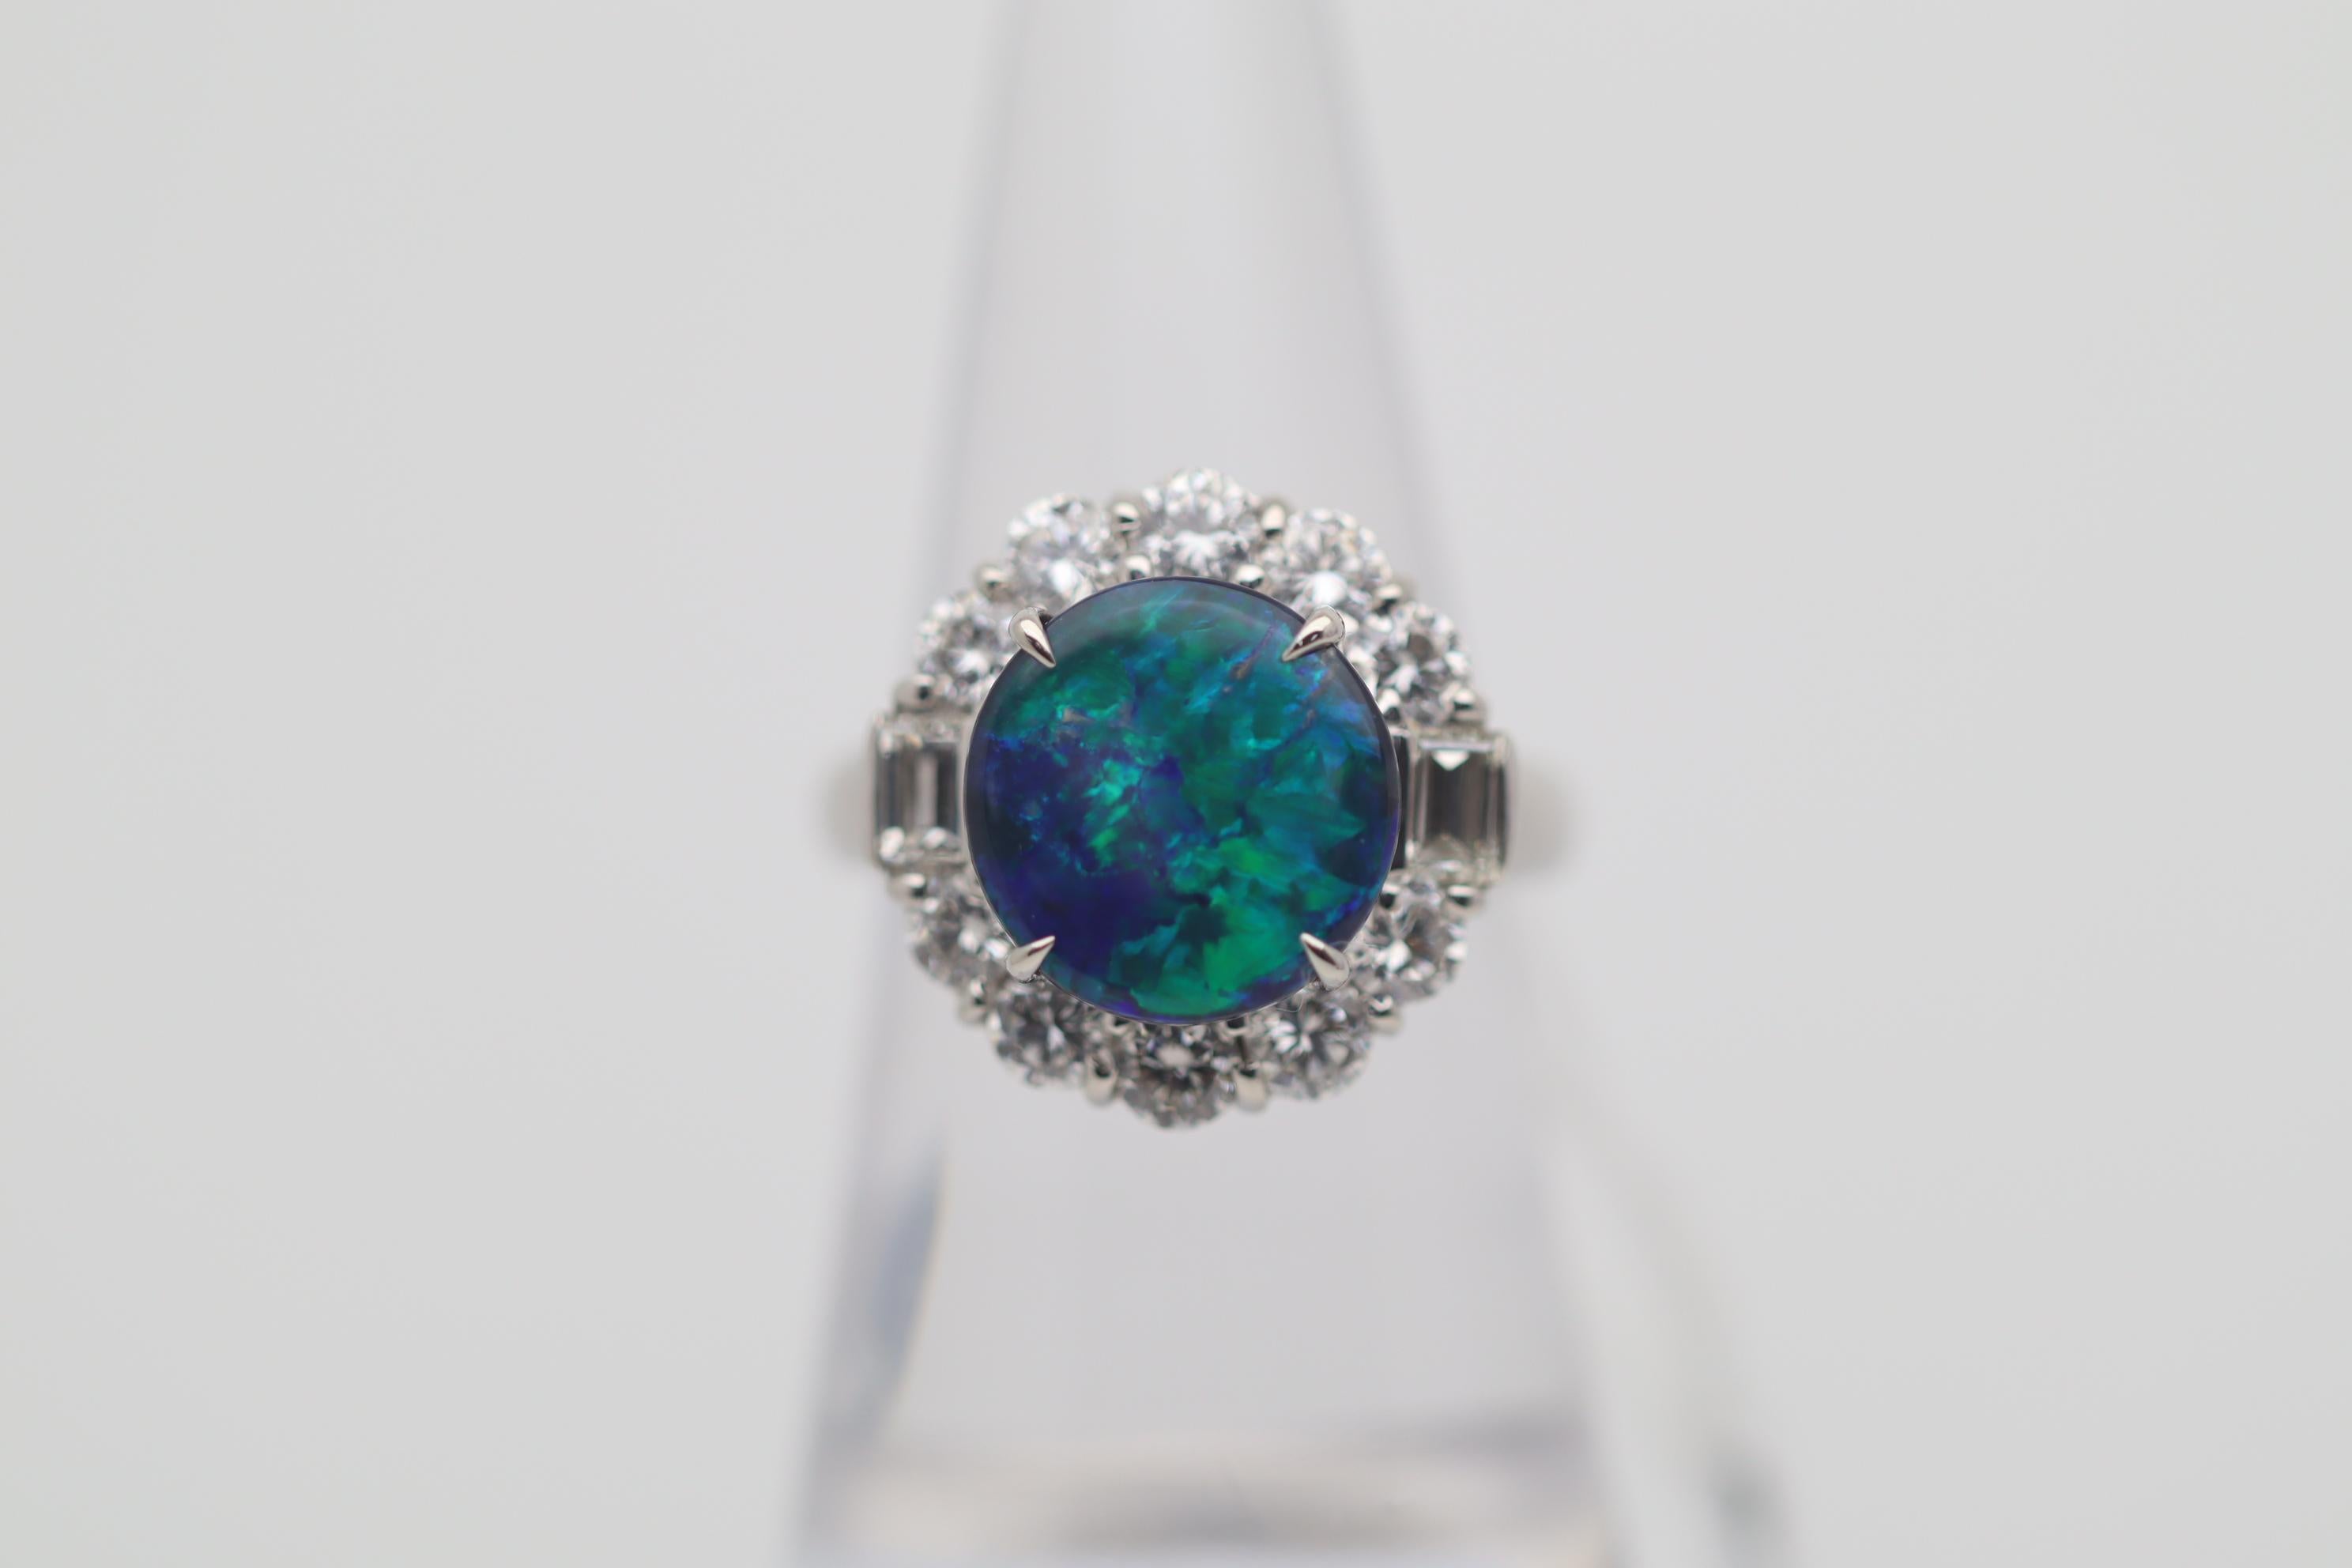 A superb true gem quality Australian black opal takes center stage. The gem opal weighs 3.67 carats and has some of the best play-of-color we have seen this year. Extremely bright and lively flashes of green and blue roll across the deep black opal